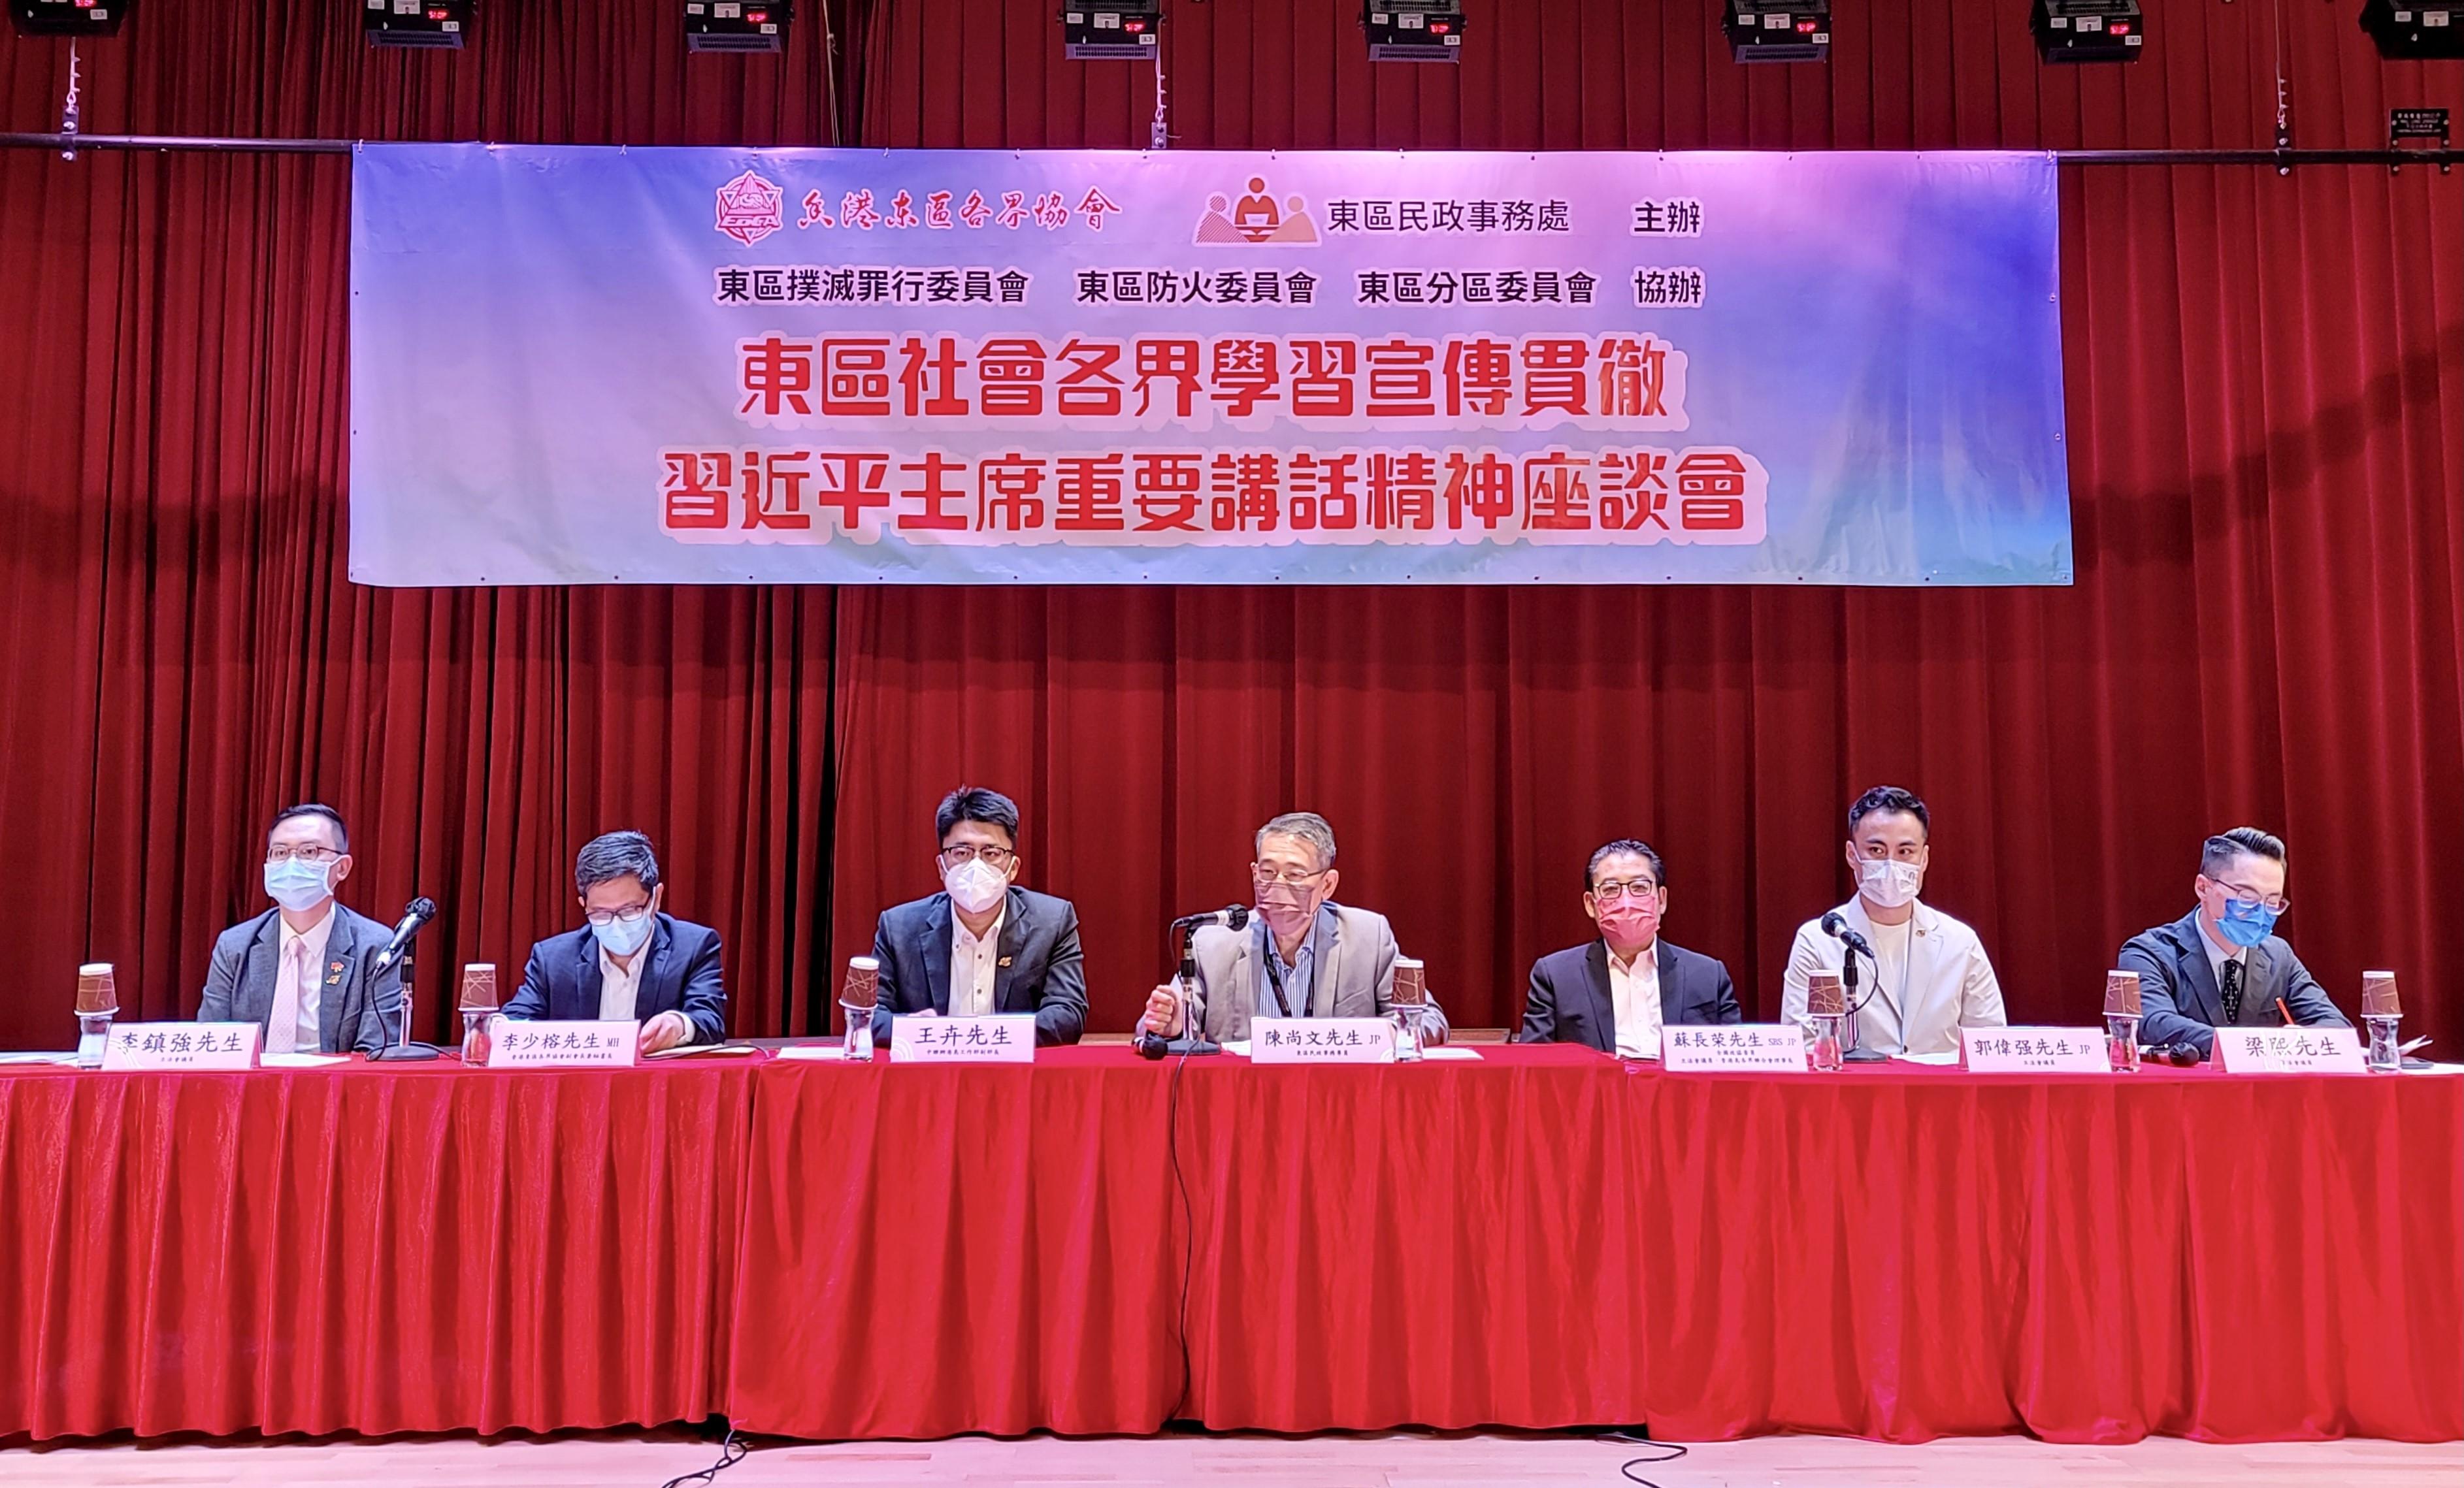 The Eastern District Office, in collaboration with the Hong Kong Eastern District Community Association, the Eastern District Fight Crime Committee, the Eastern District Fire Safety Committee and the Eastern Area Committees yesterday (July 21) jointly held the "Session to Learn About, Promote and Implement the Spirit of President Xi's Important Speech" at Causeway Bay Community Centre. Photo shows the District Officer (Eastern), Mr Simon Chan (fourth left), delivering a speech at the session.